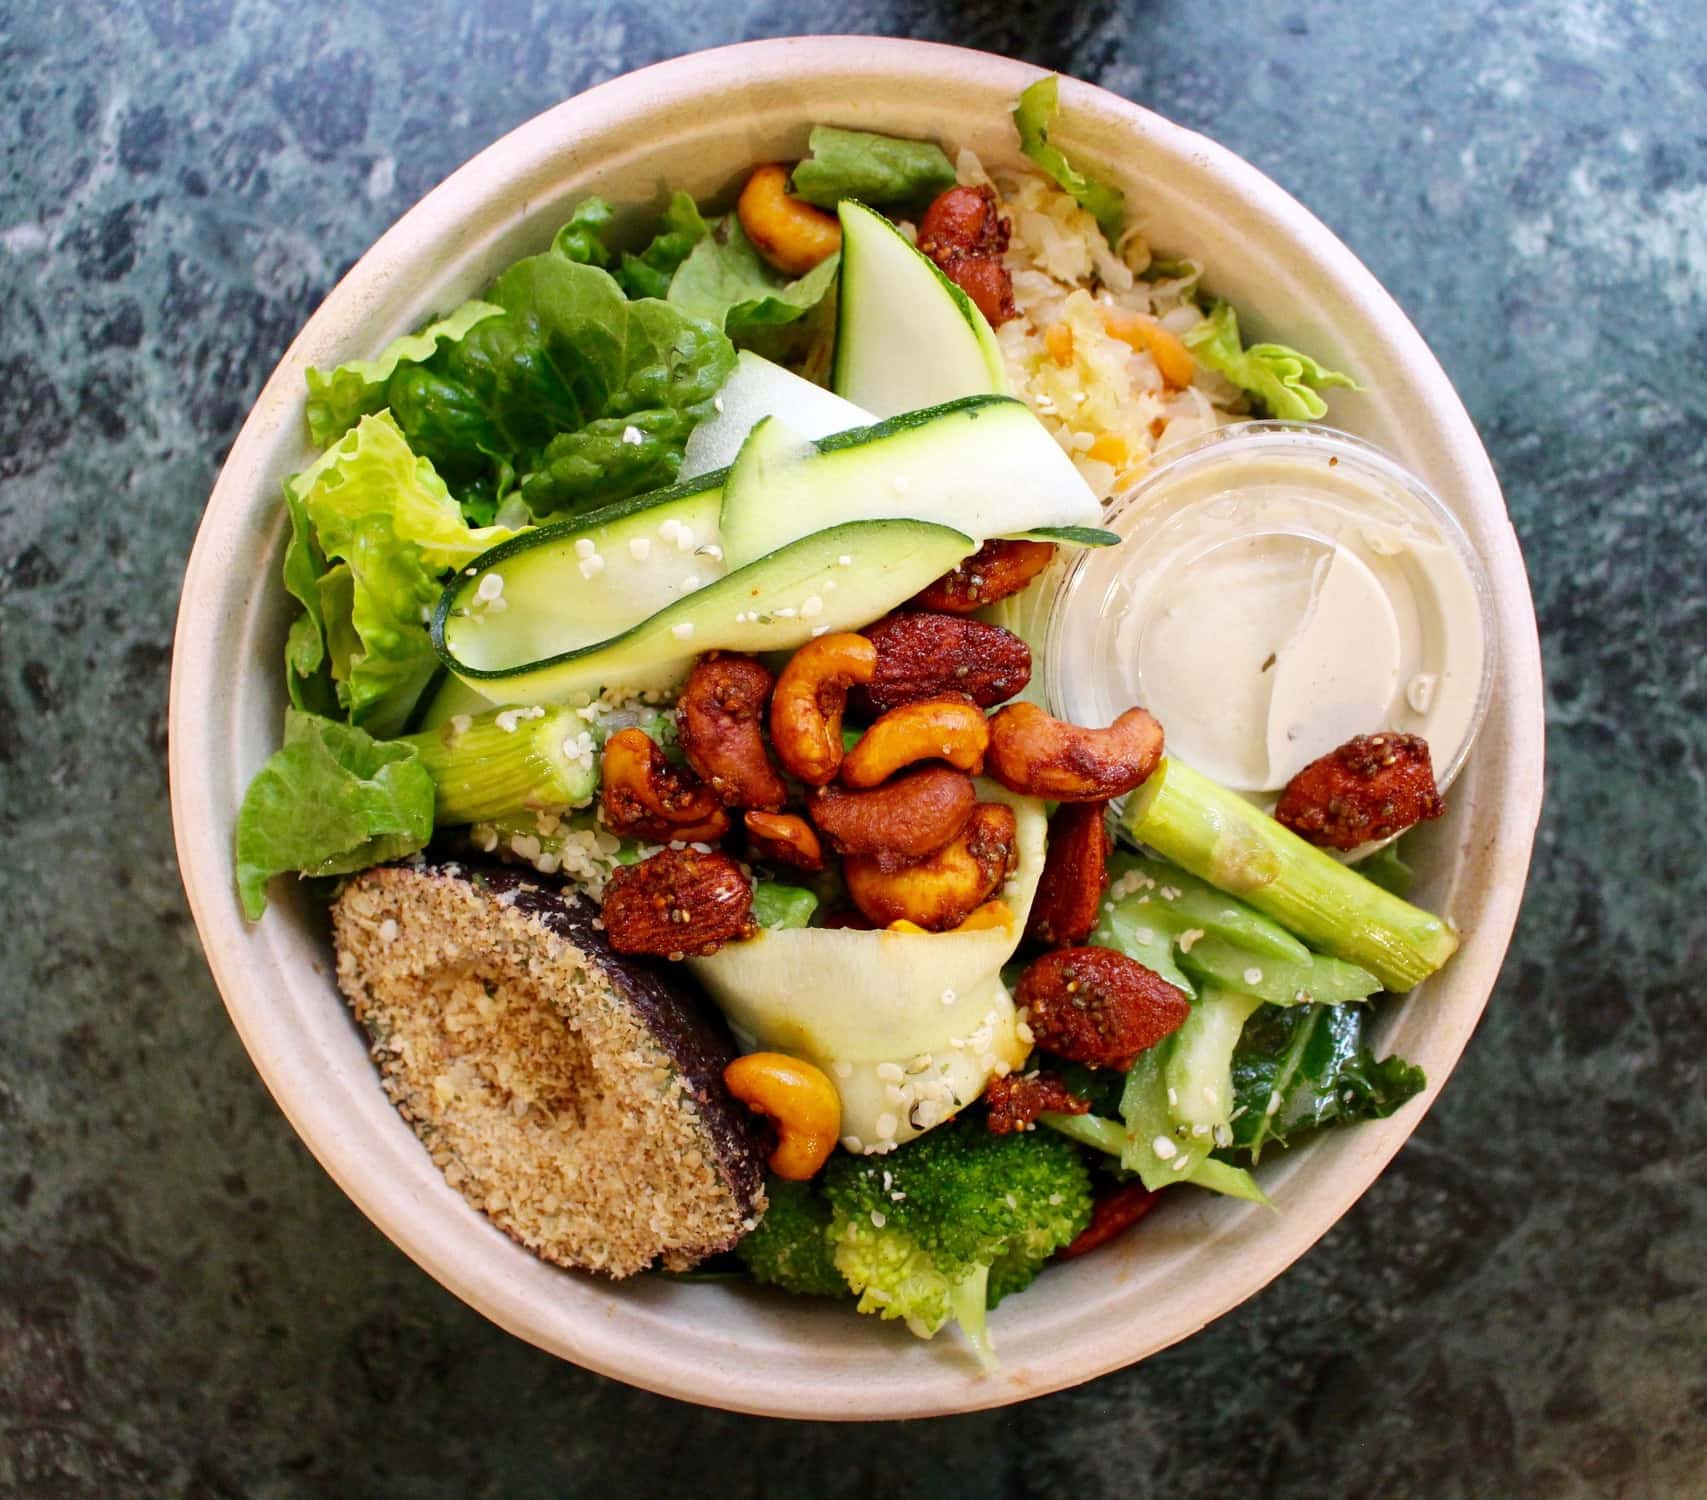 a meal bowl with salad, nuts and dressing